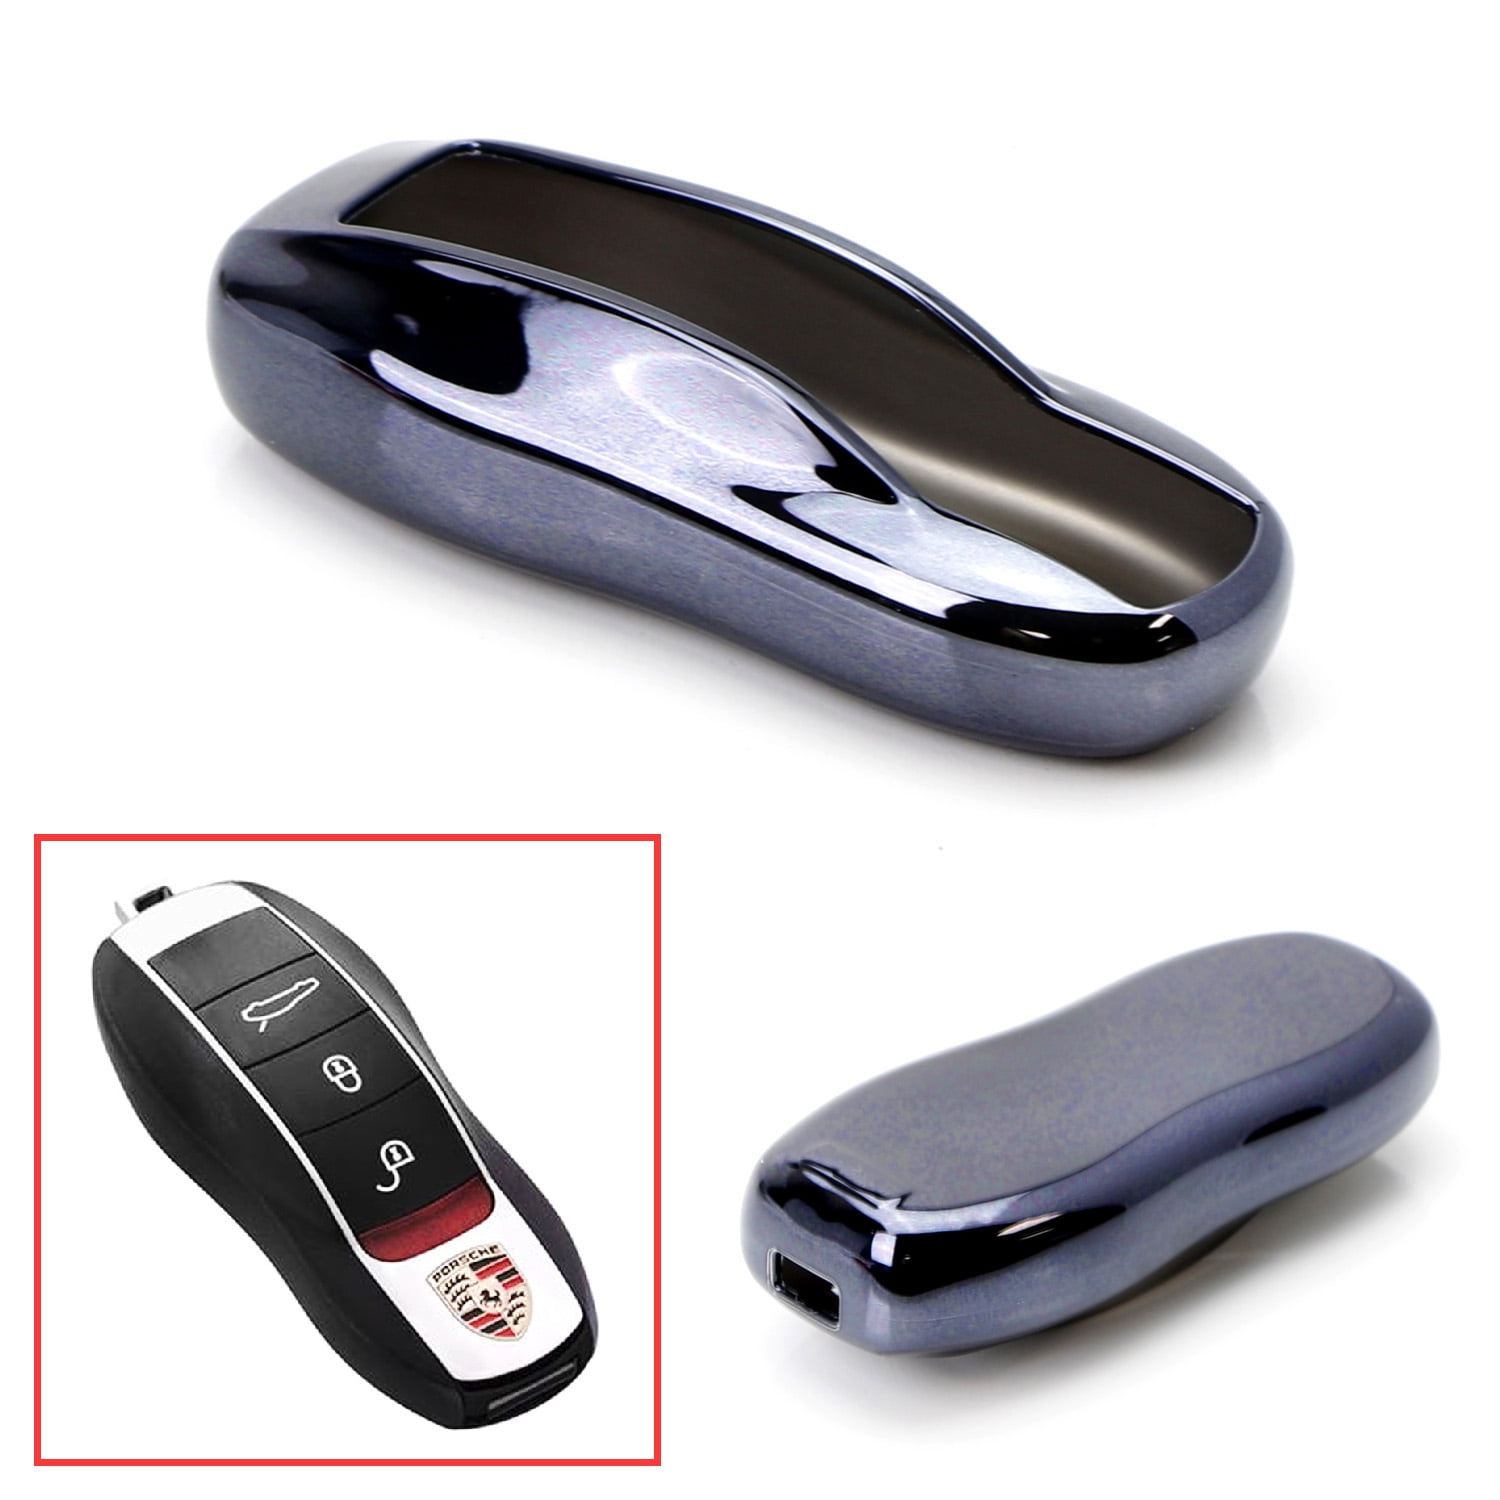 Light Weight Glossy Finish Key Fob Replacement Protection Case Carbon Fiber Key Fob Cover For Porsche Key Fob Remote Key Black Fit Porsche 718 911 918 Panamera Macan Cayenne Boxster Cayman Car Key